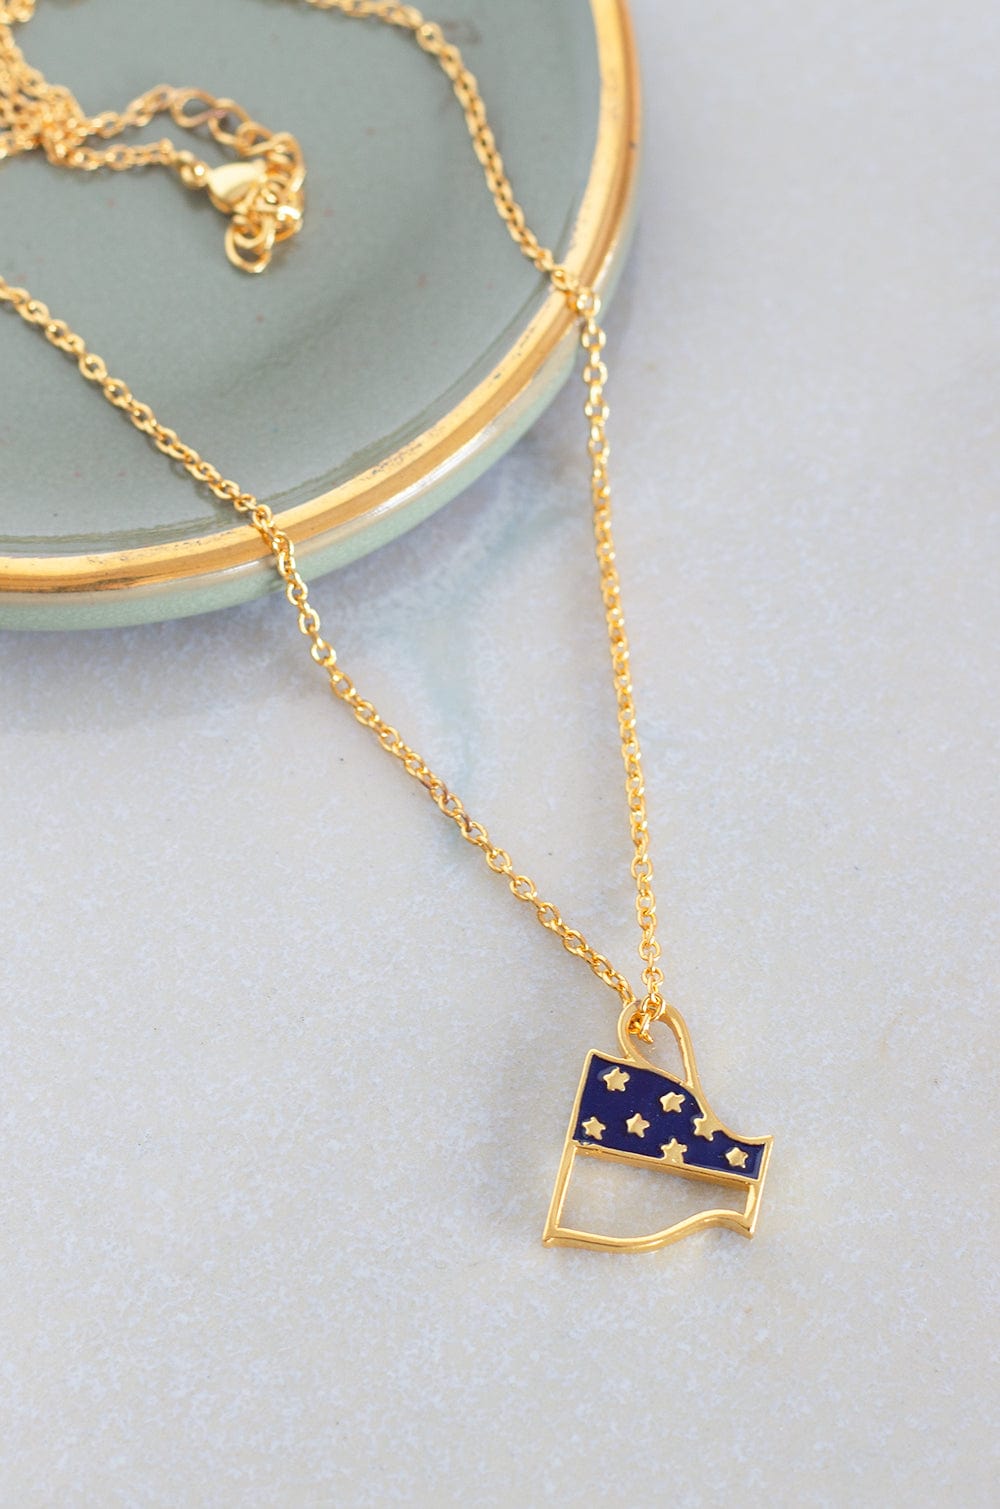 NAVY Alice's Tea Party Gold Plated Pendant Necklace